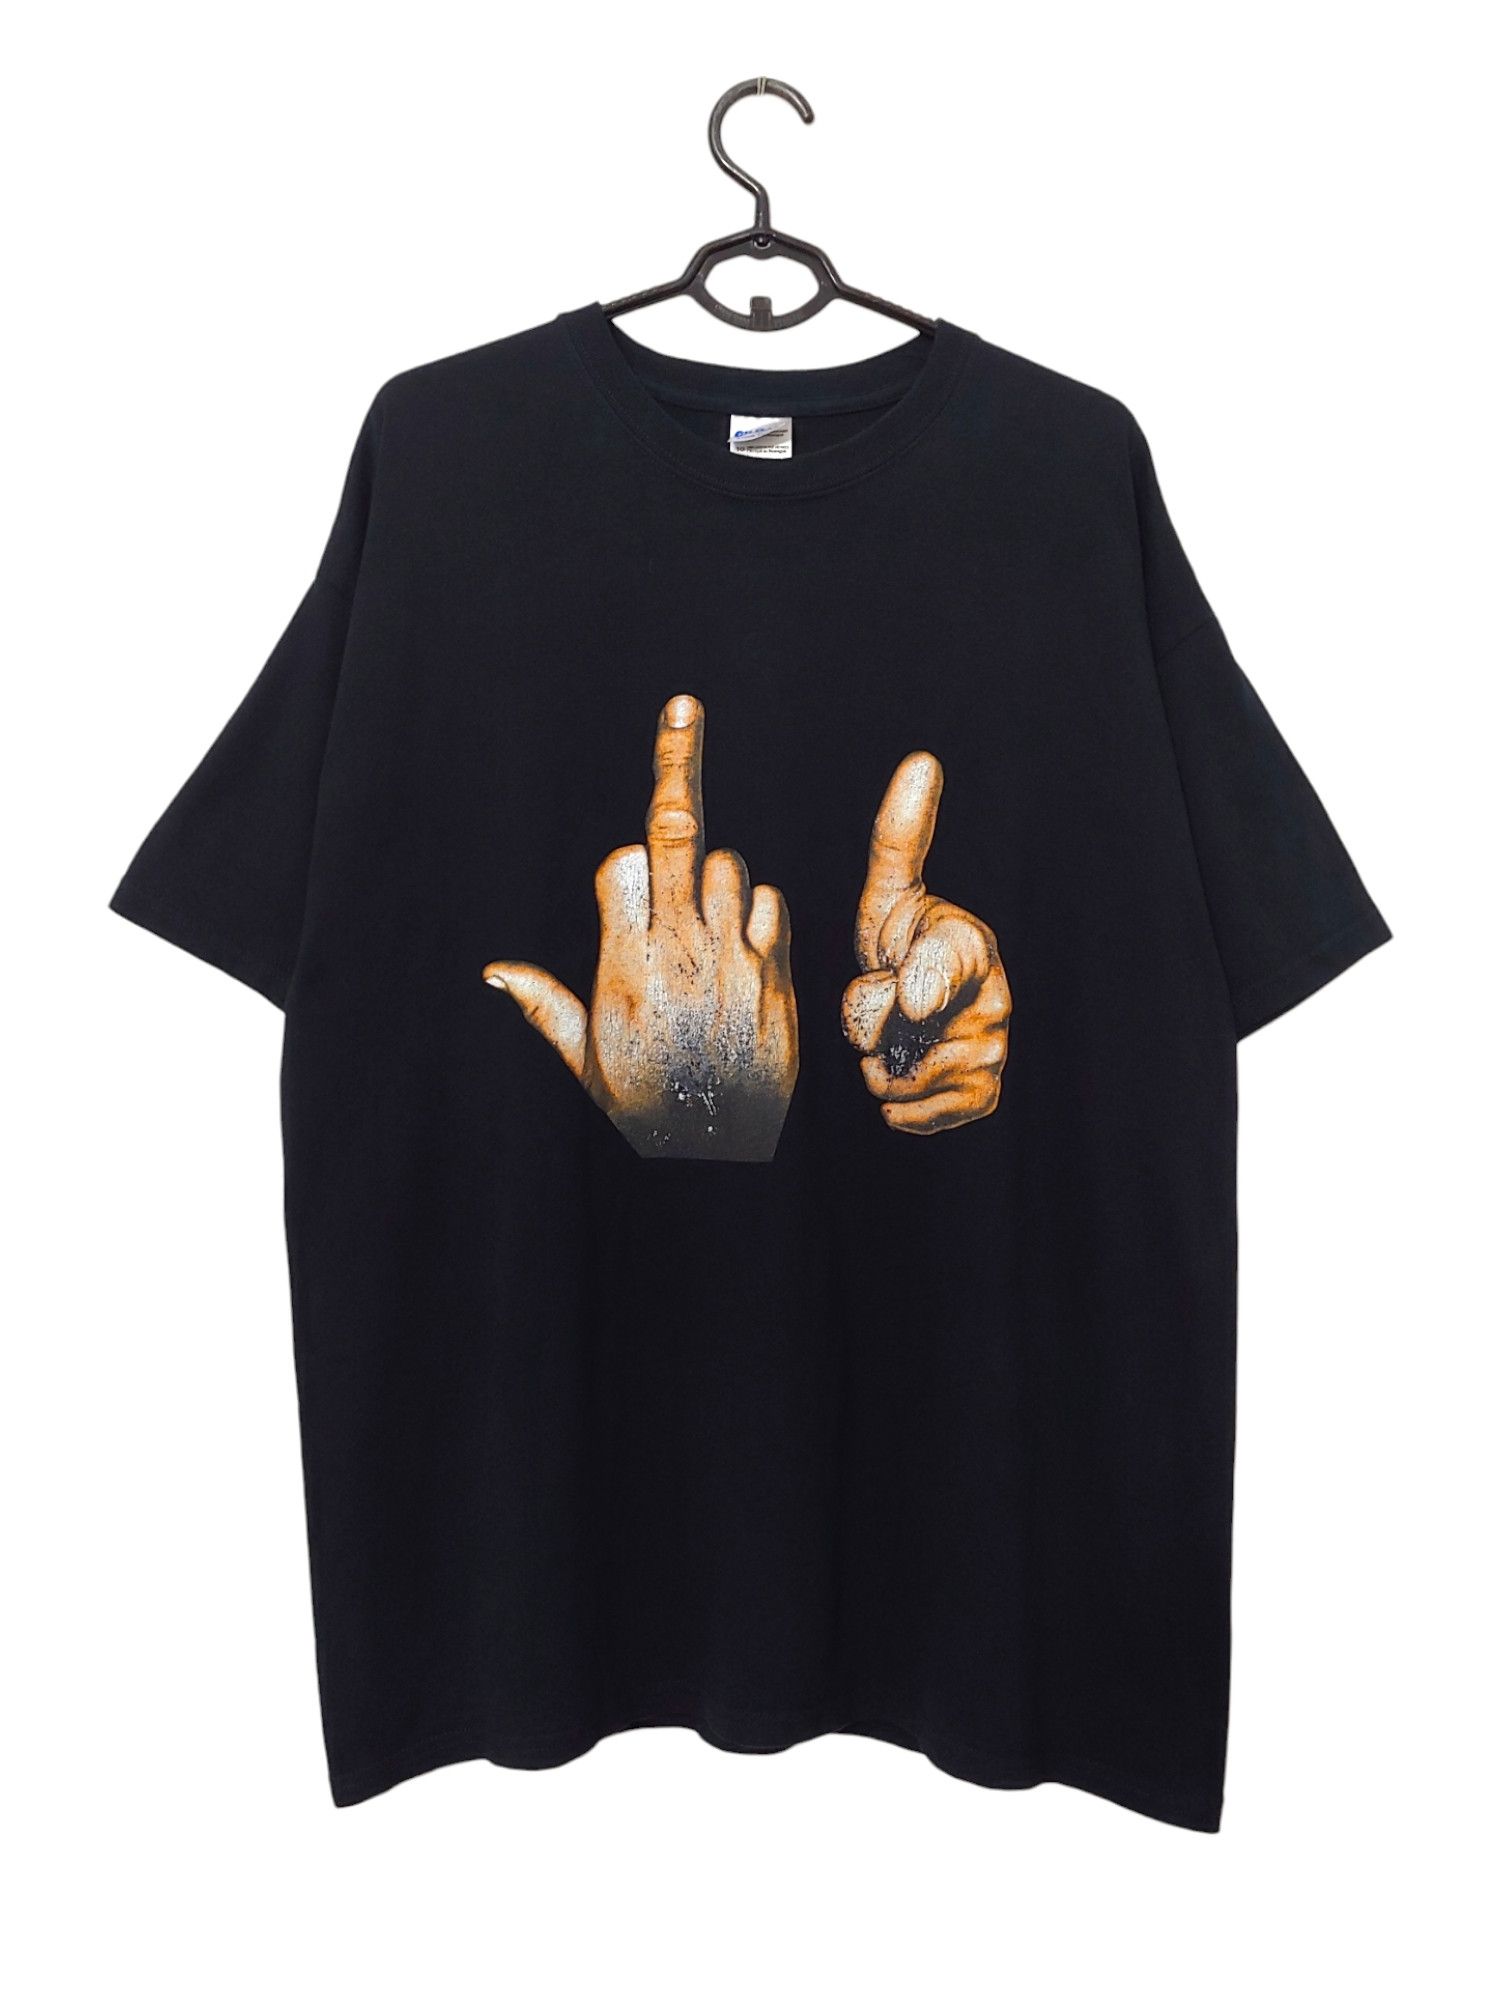 Vintage Vintage Fuck You Hand Sign Finger T Shirt Wore by ASAP Rocky |  Grailed